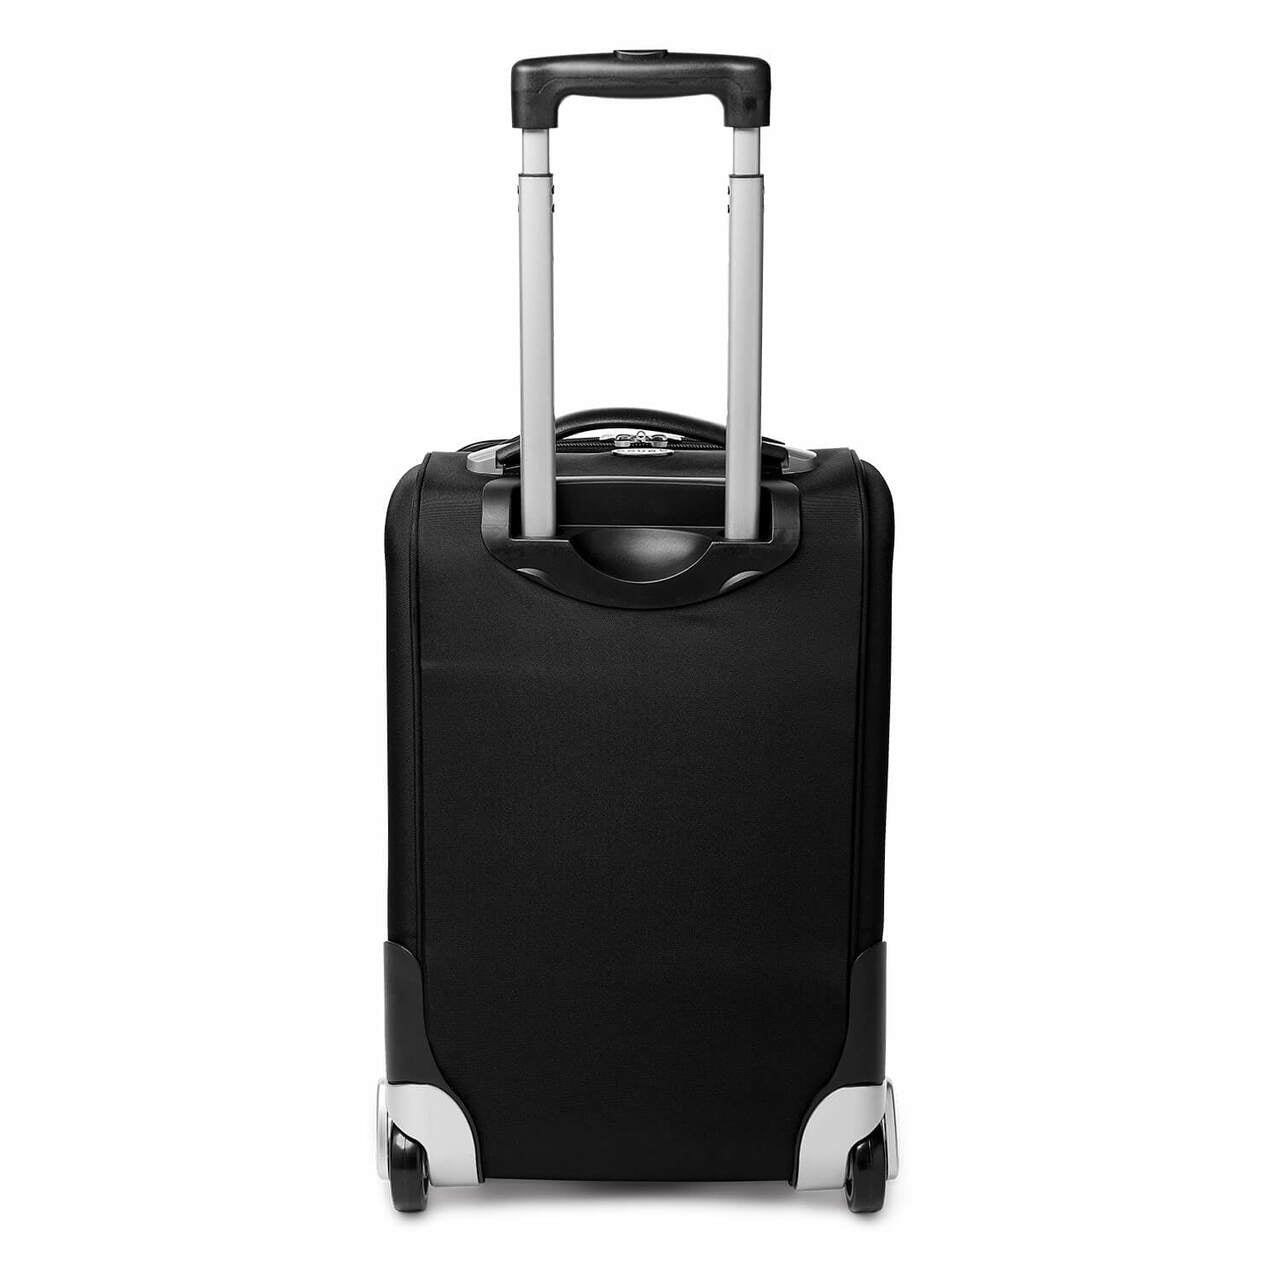 Giants Carry On Luggage | San Francisco Giants Rolling Carry On Luggage